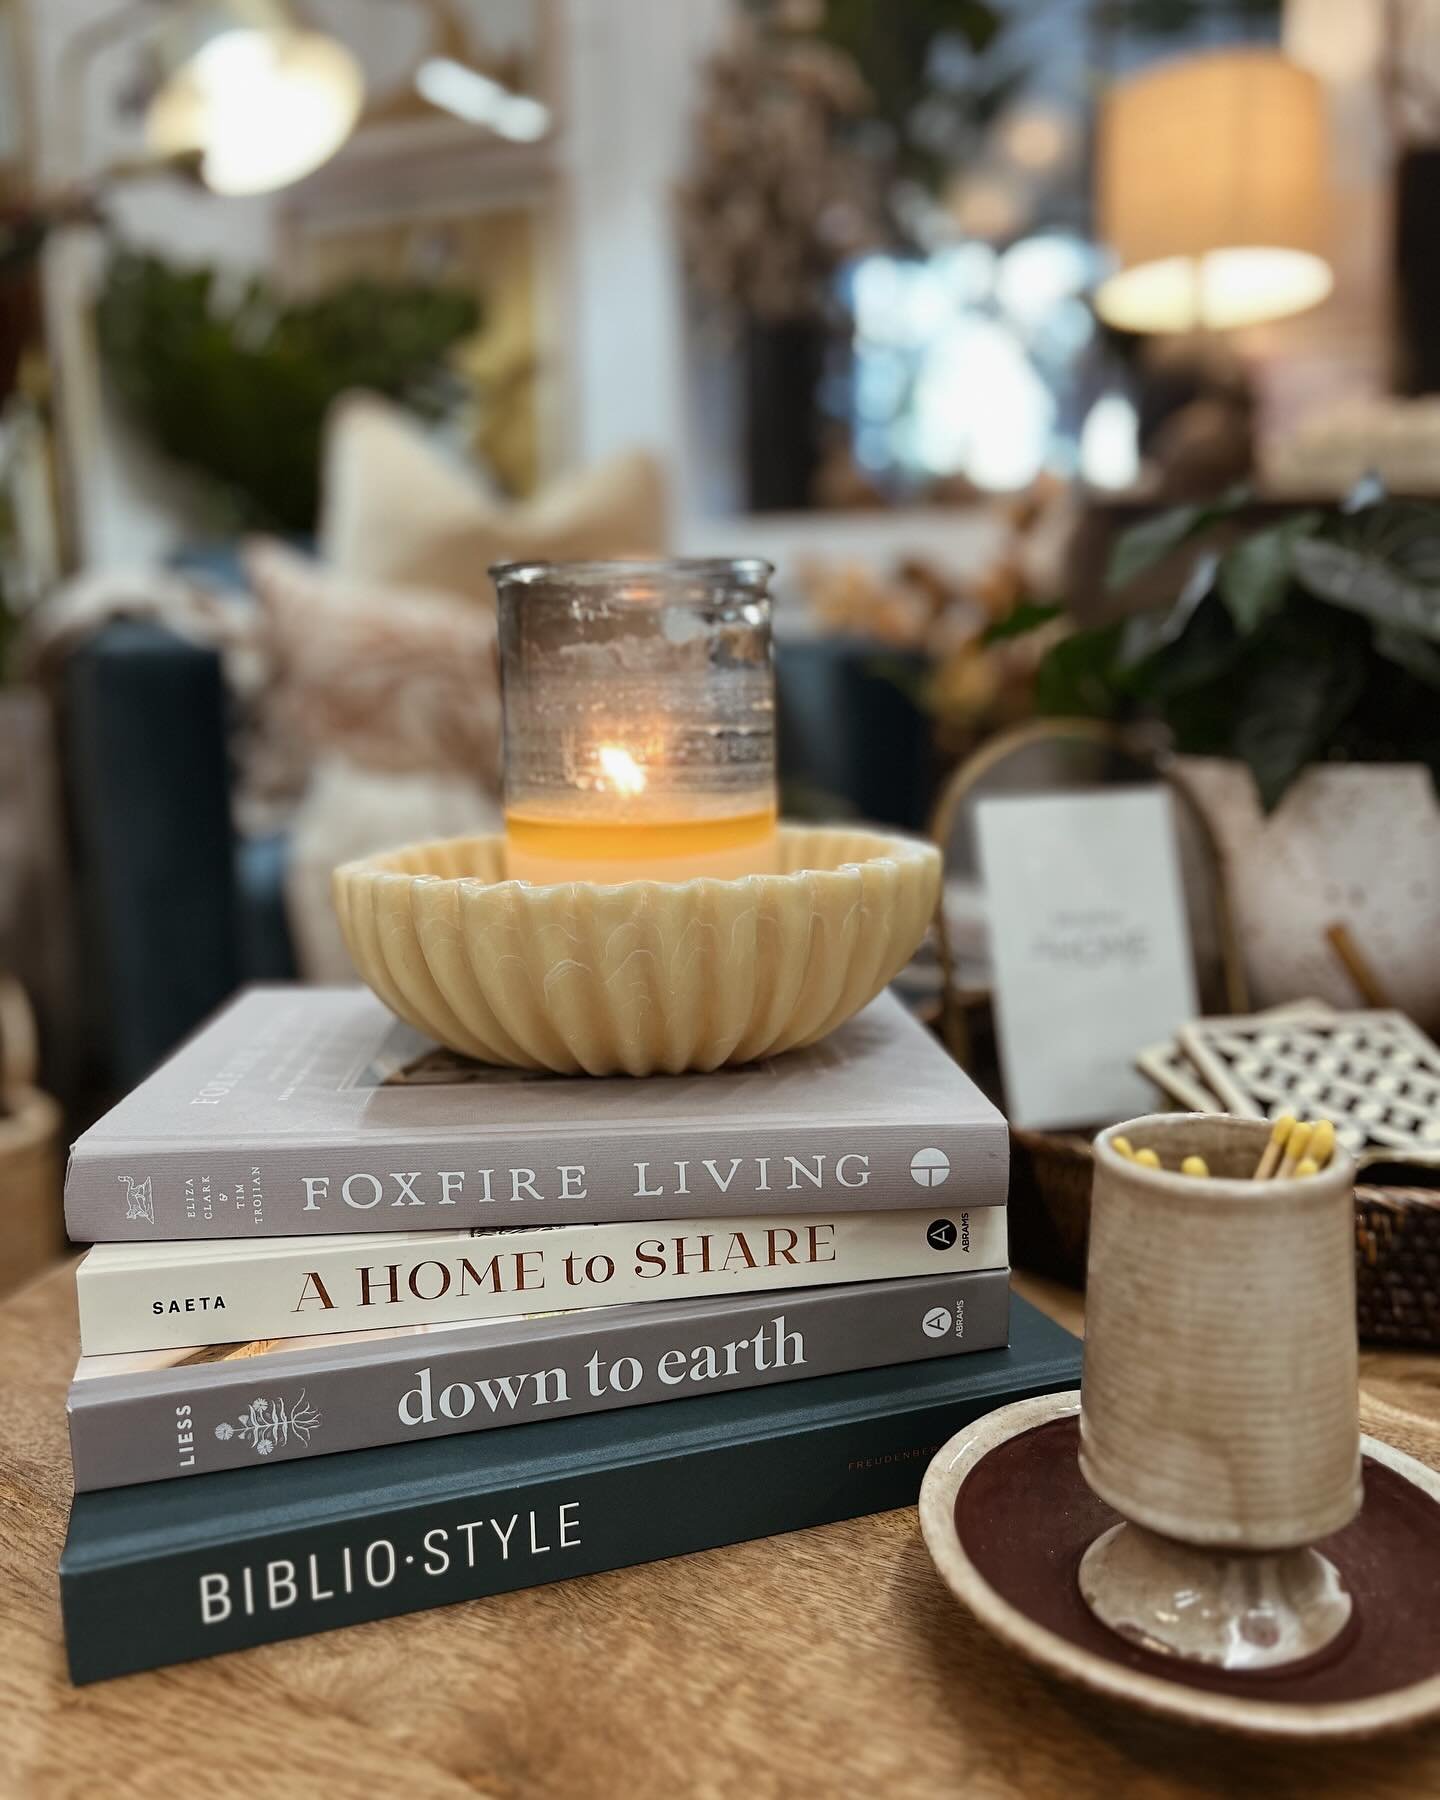 For those who love HOME. 🫶🏼

The thought behind everything we do is to help you make your home a sanctuary. Where you can breathe, dream, rest, and live fully. 

Stop in and explore what&rsquo;s new! We have a wide range of home goods + furnishings